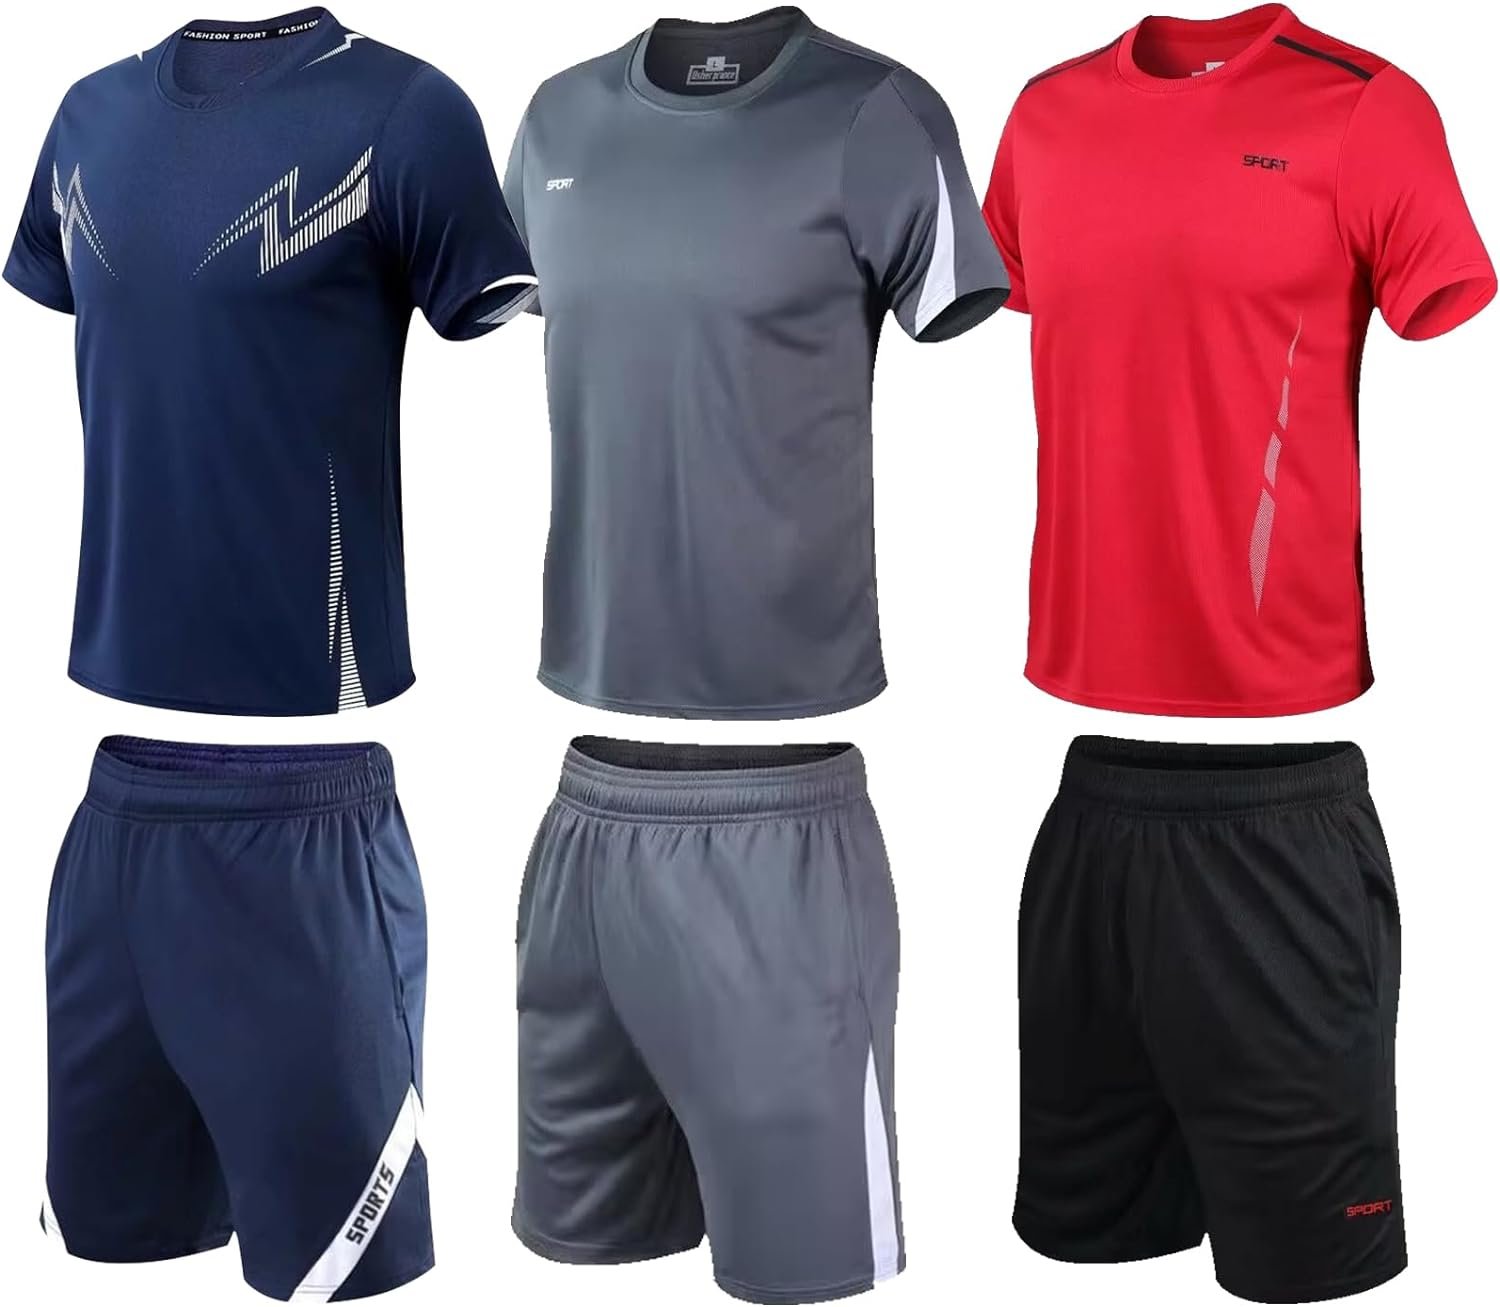 BOOMCOOL Gym Mens Clothes Workout Shirts for Men Outfits Sets 6pcs Shirts+Shorts Review